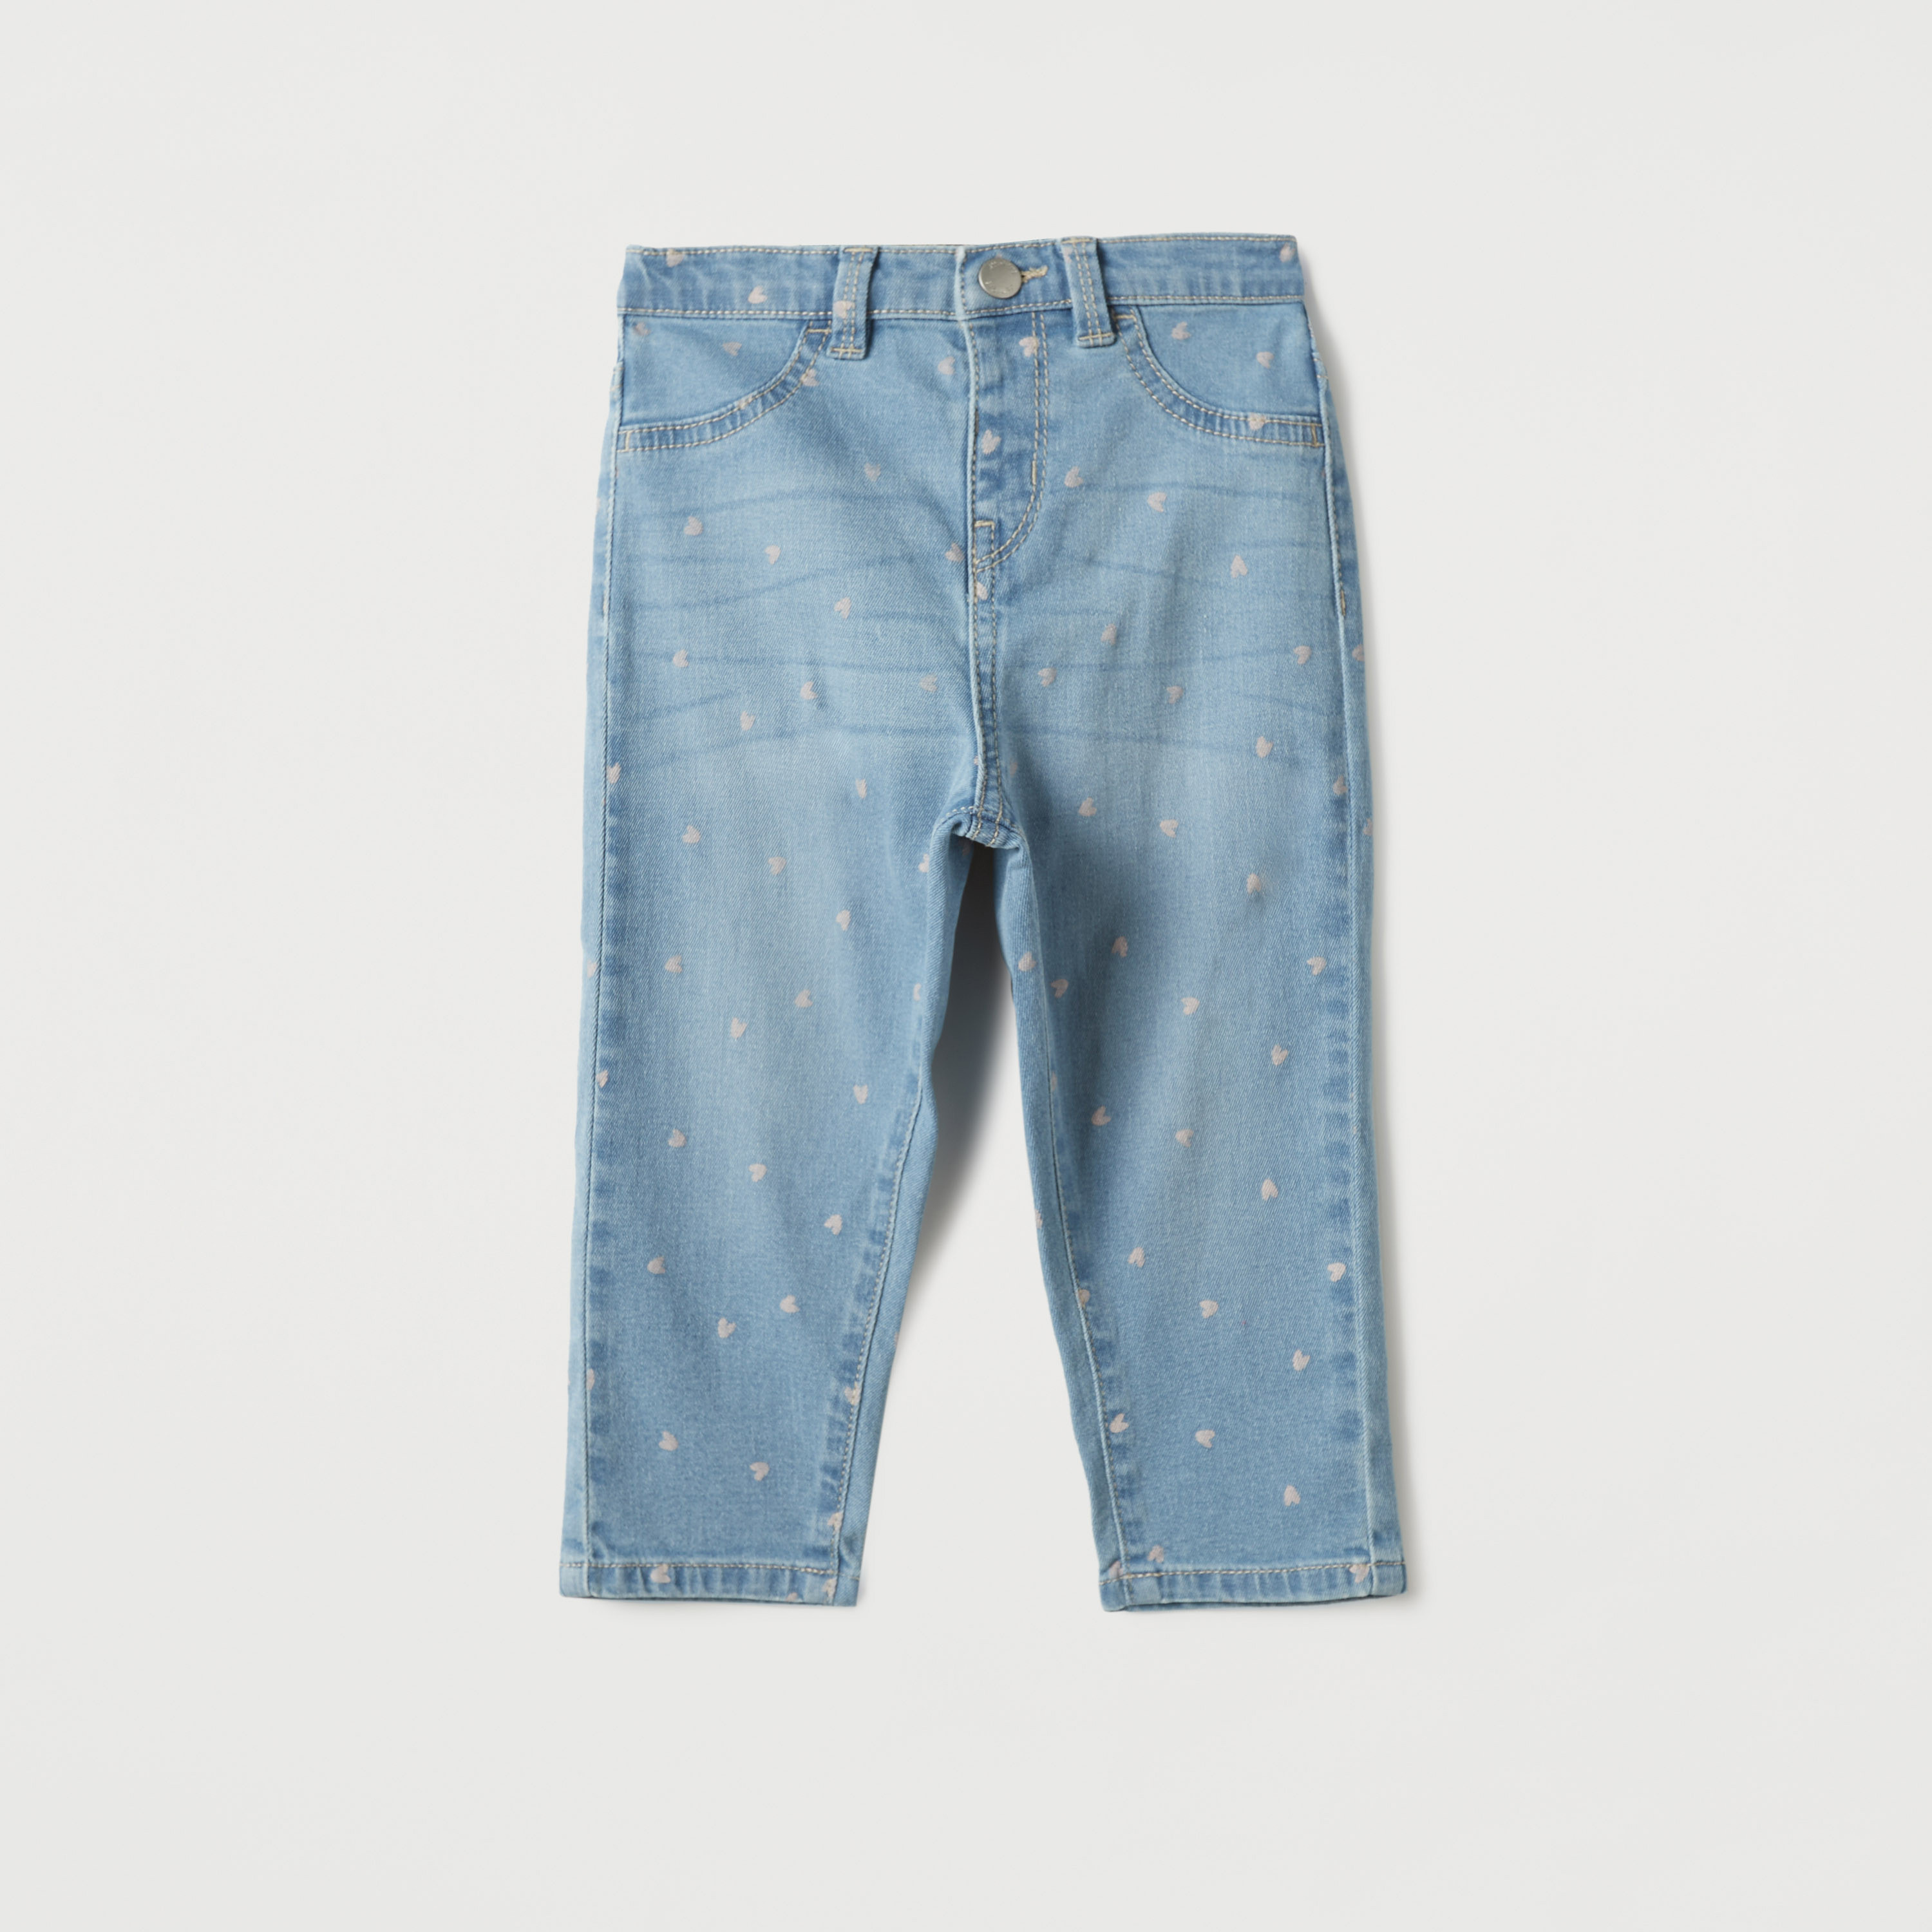 Flared Wide Leg Denim Denim Pants For Toddler Girls With Tassel Detail Infant  Baby Trousers For Casual Wear DW4511 From Toddlerlife, $8.5 | DHgate.Com